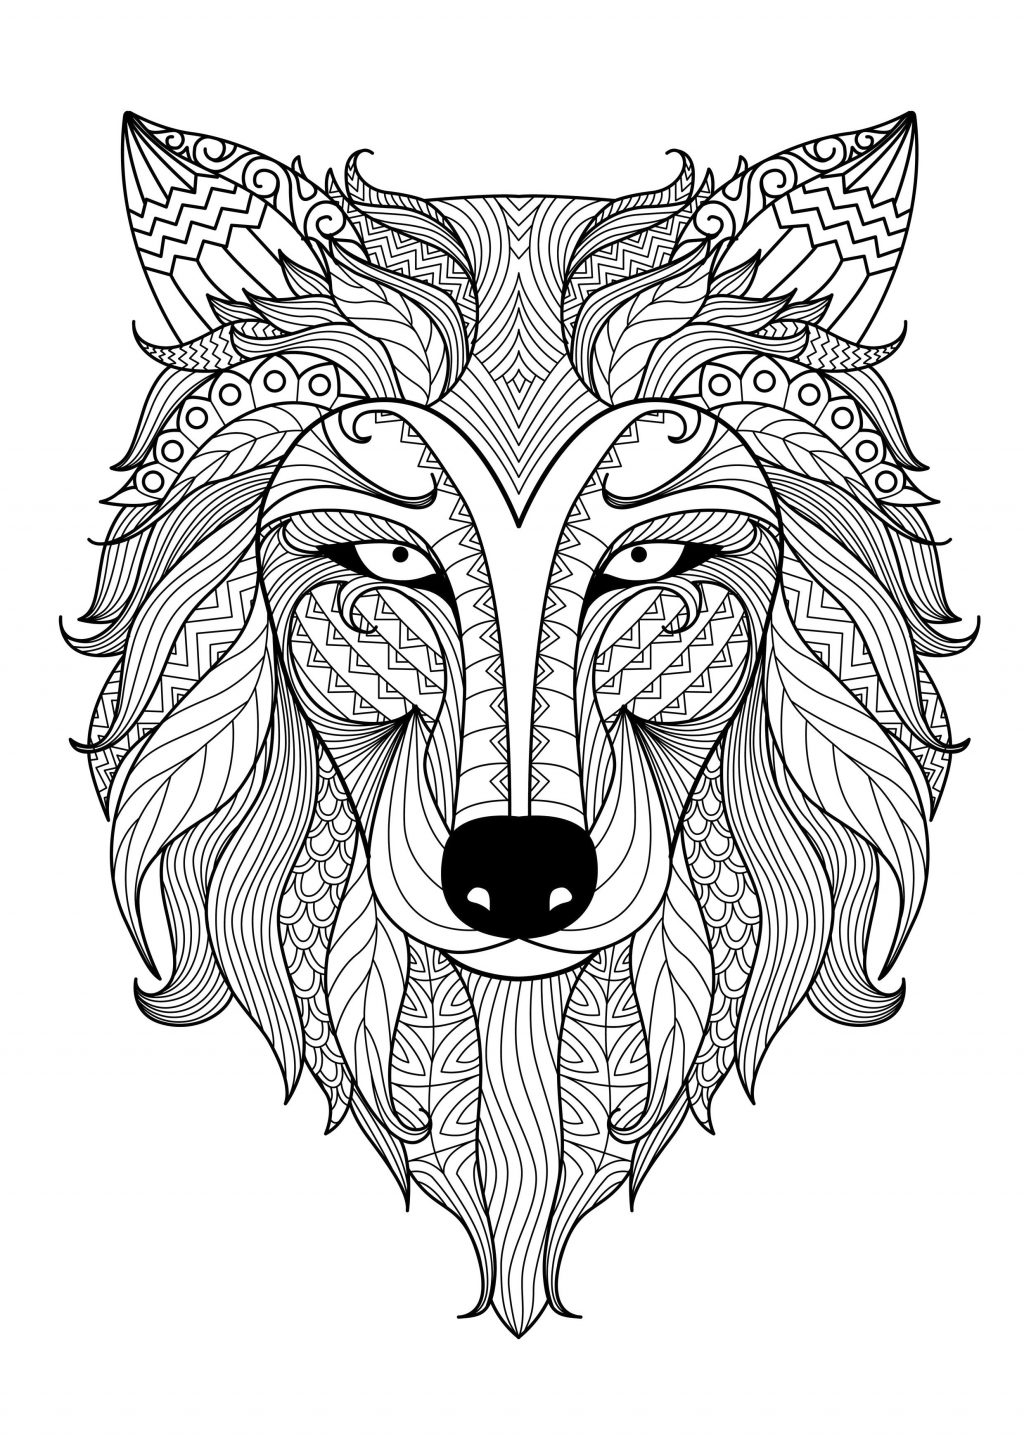 Coloring Pages Of Animals Hard Coloring Books Staggering Hard Coloring Pages Of Animals